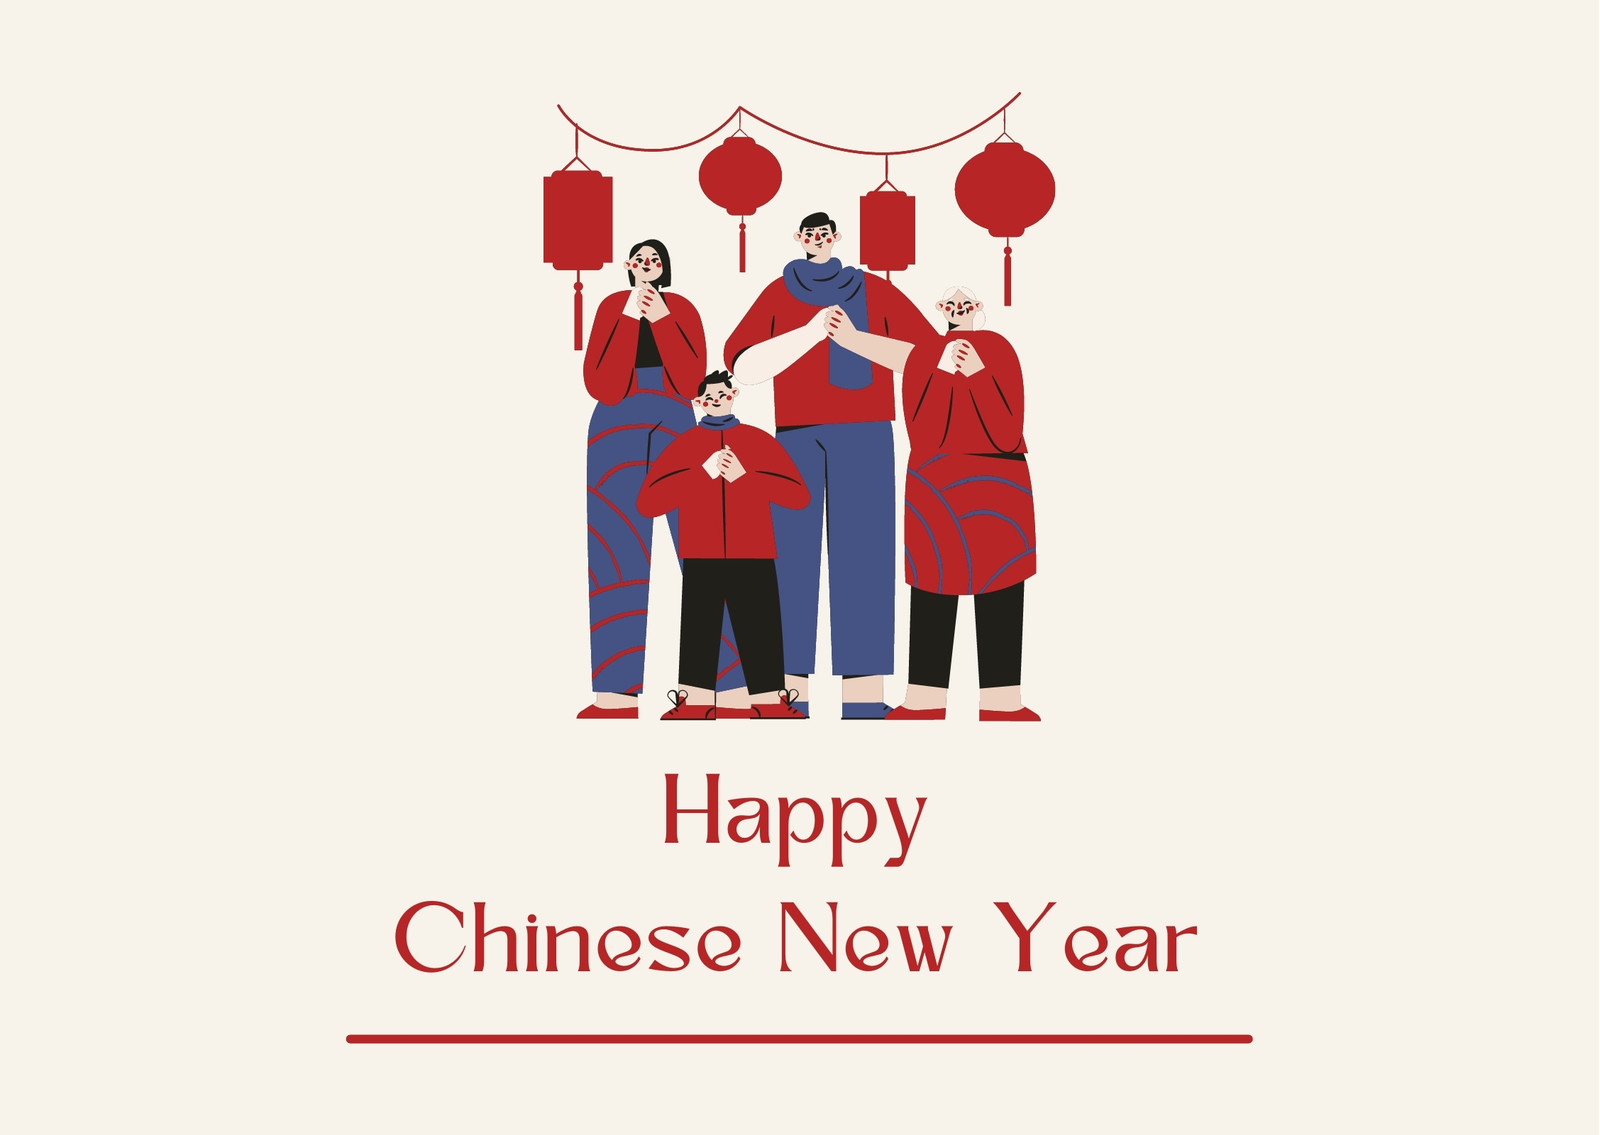 Chinese New Year Wishes  Free Cards Template - Piktochart